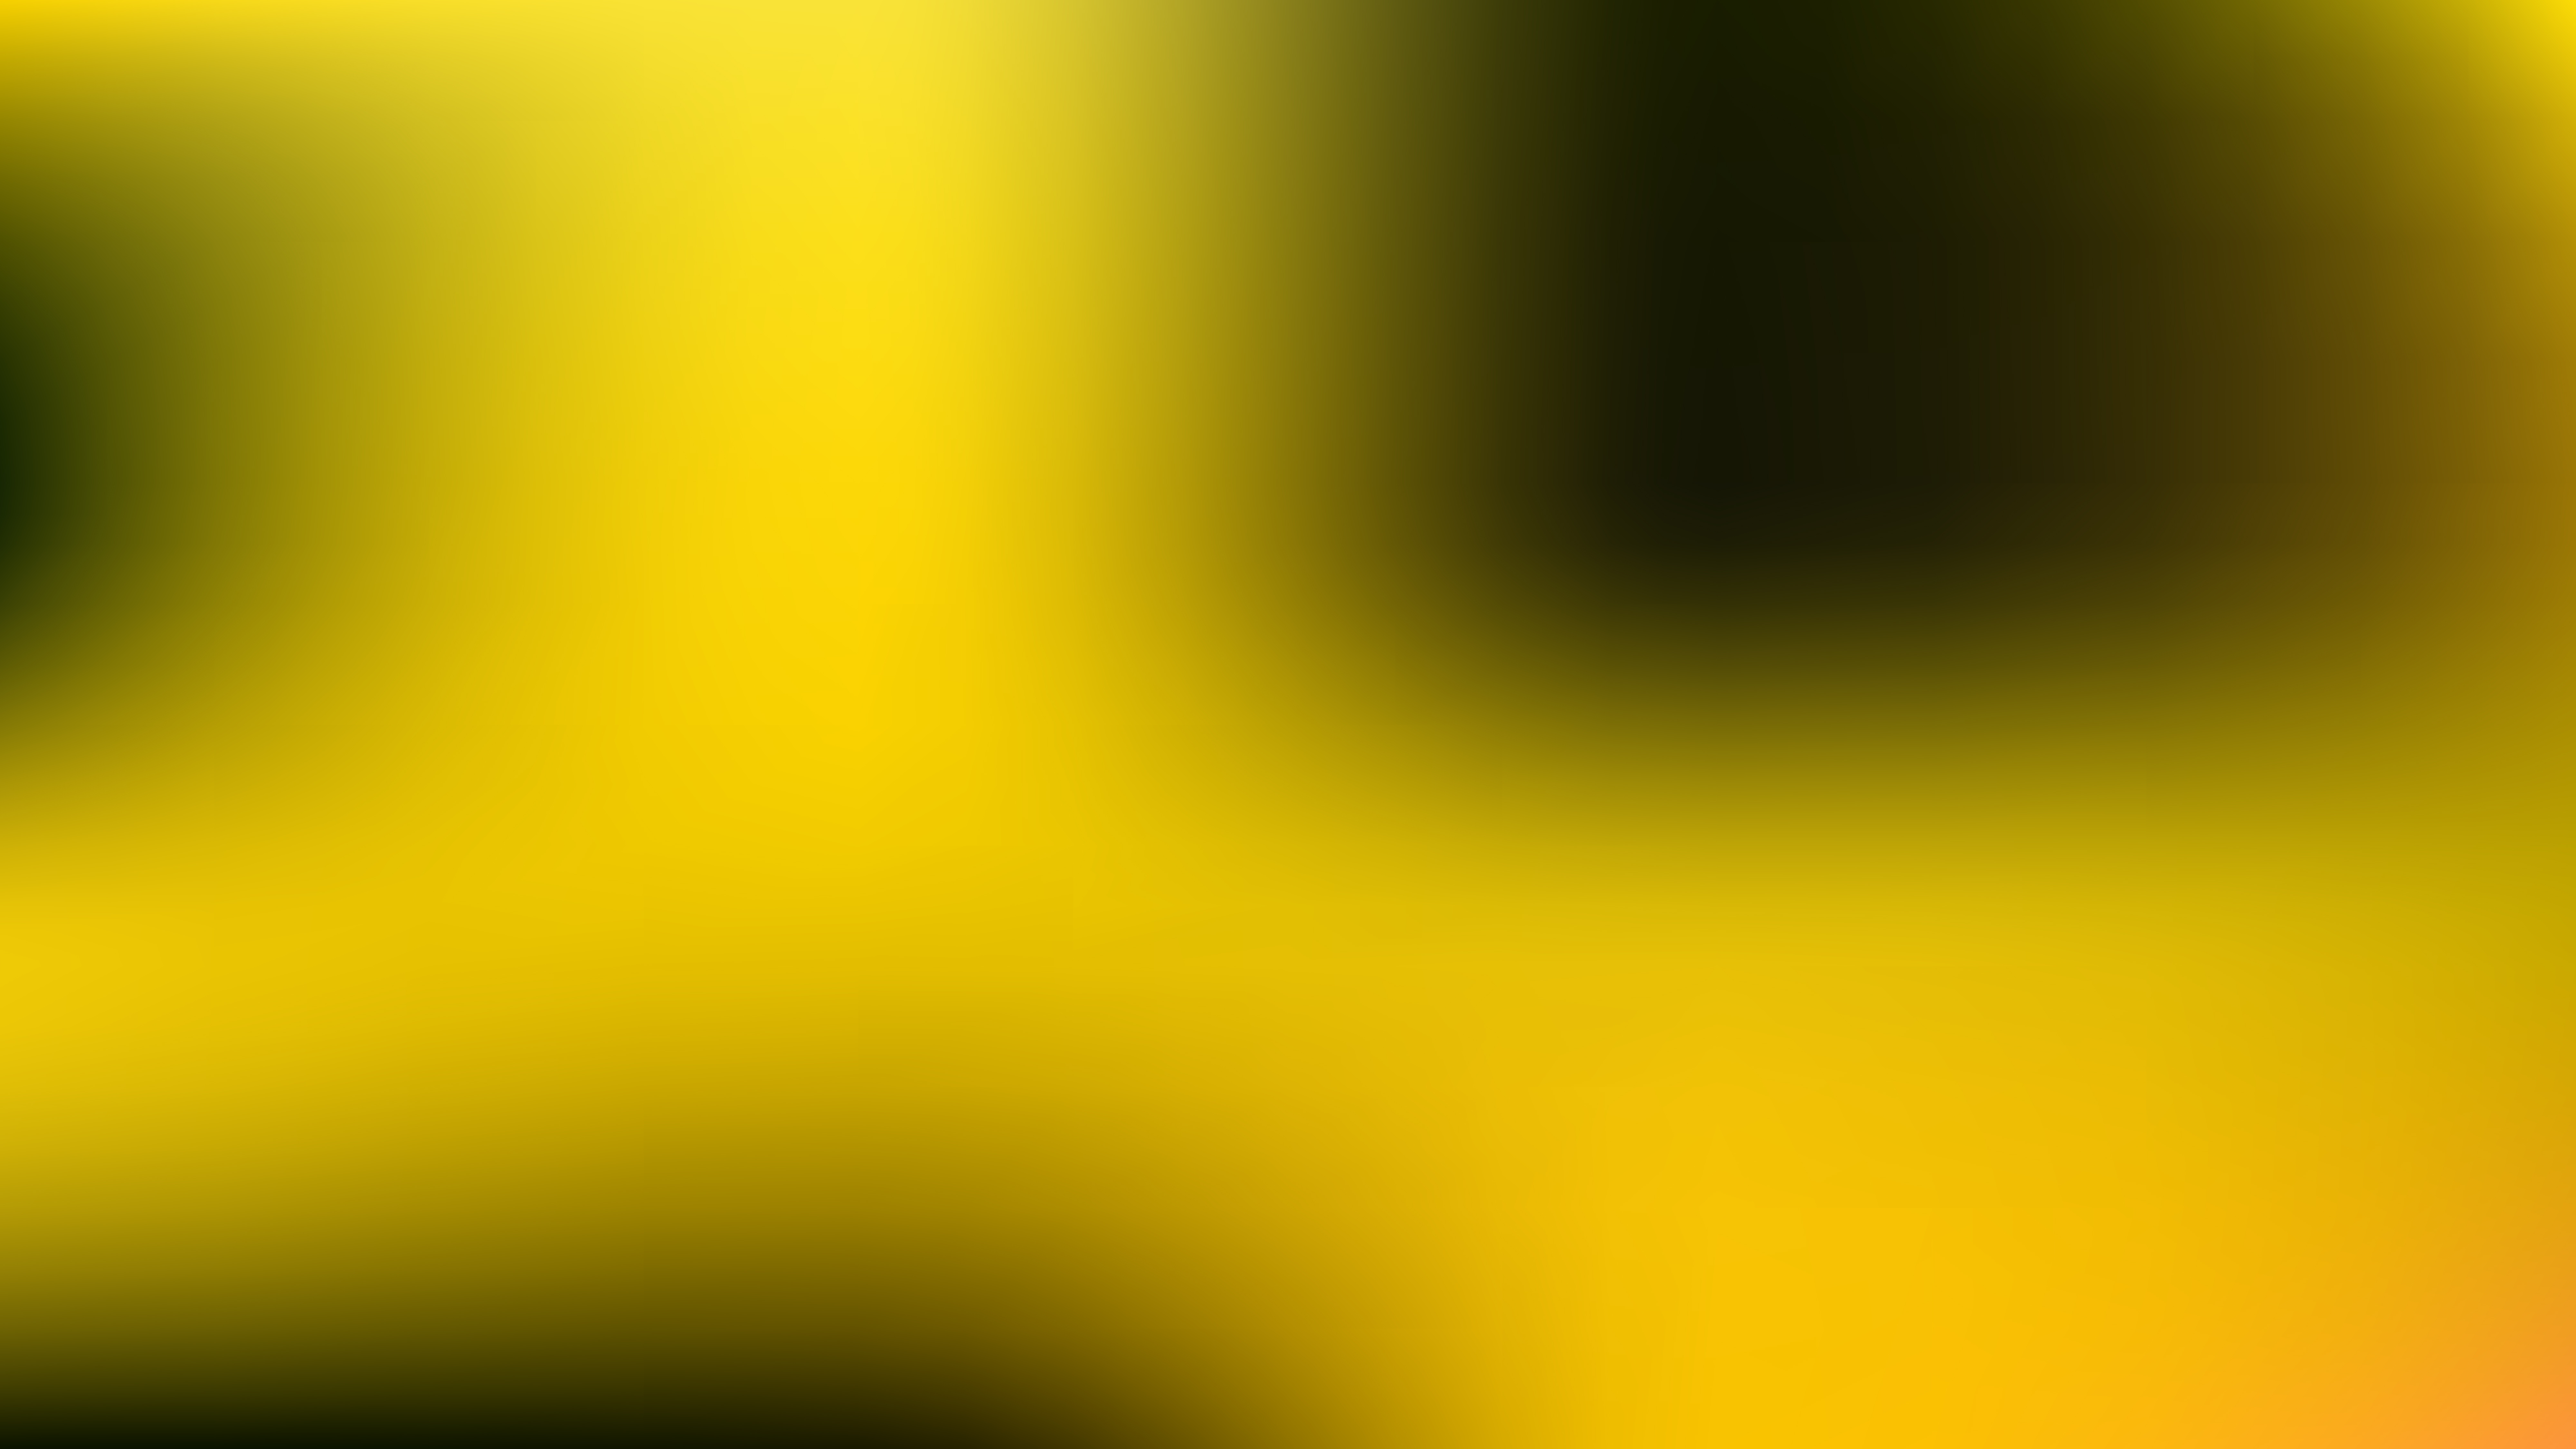 Free Black and Yellow Blurred Background Image